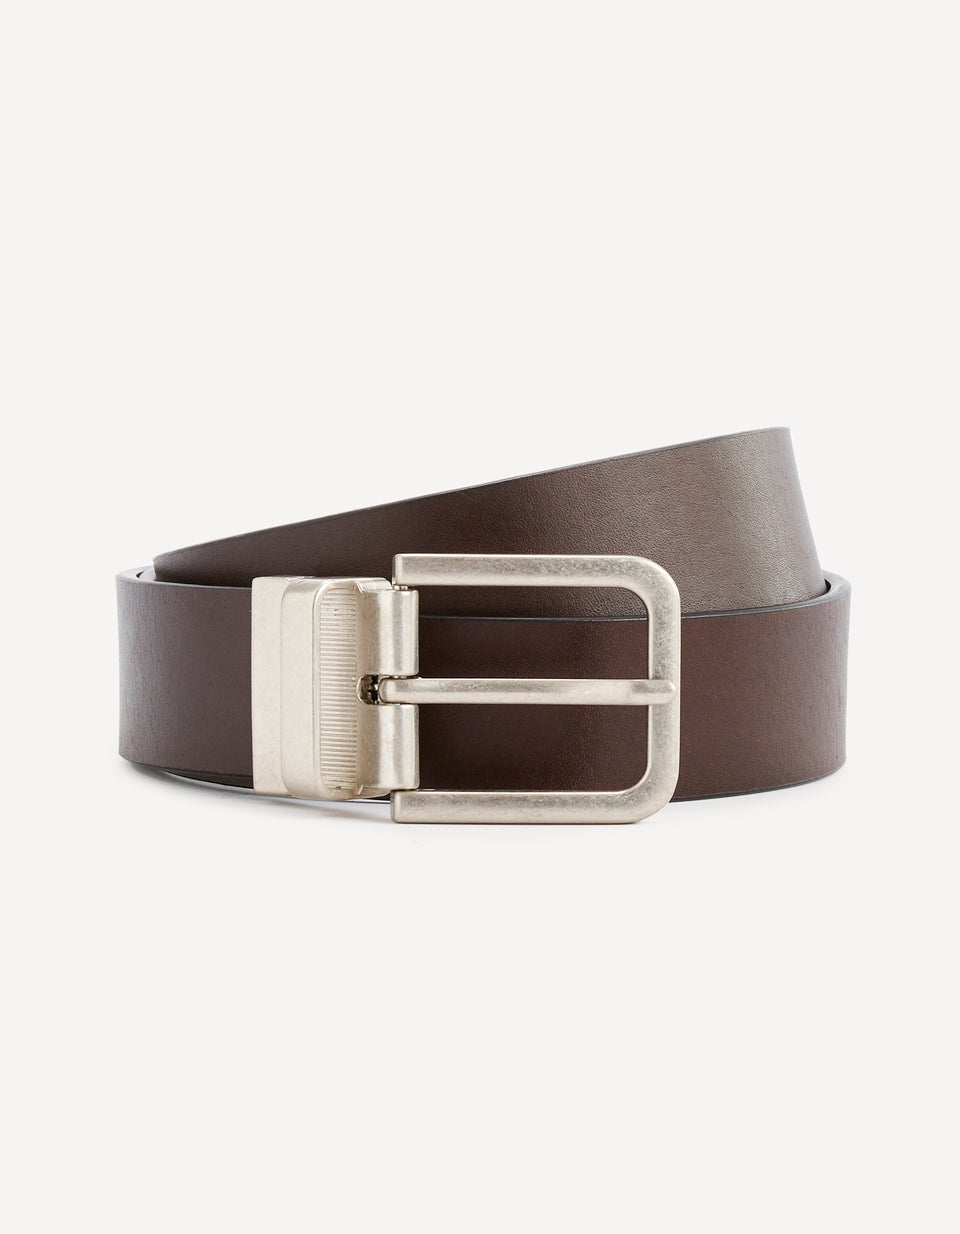 Brown Leather Belt With Metallic Buckle